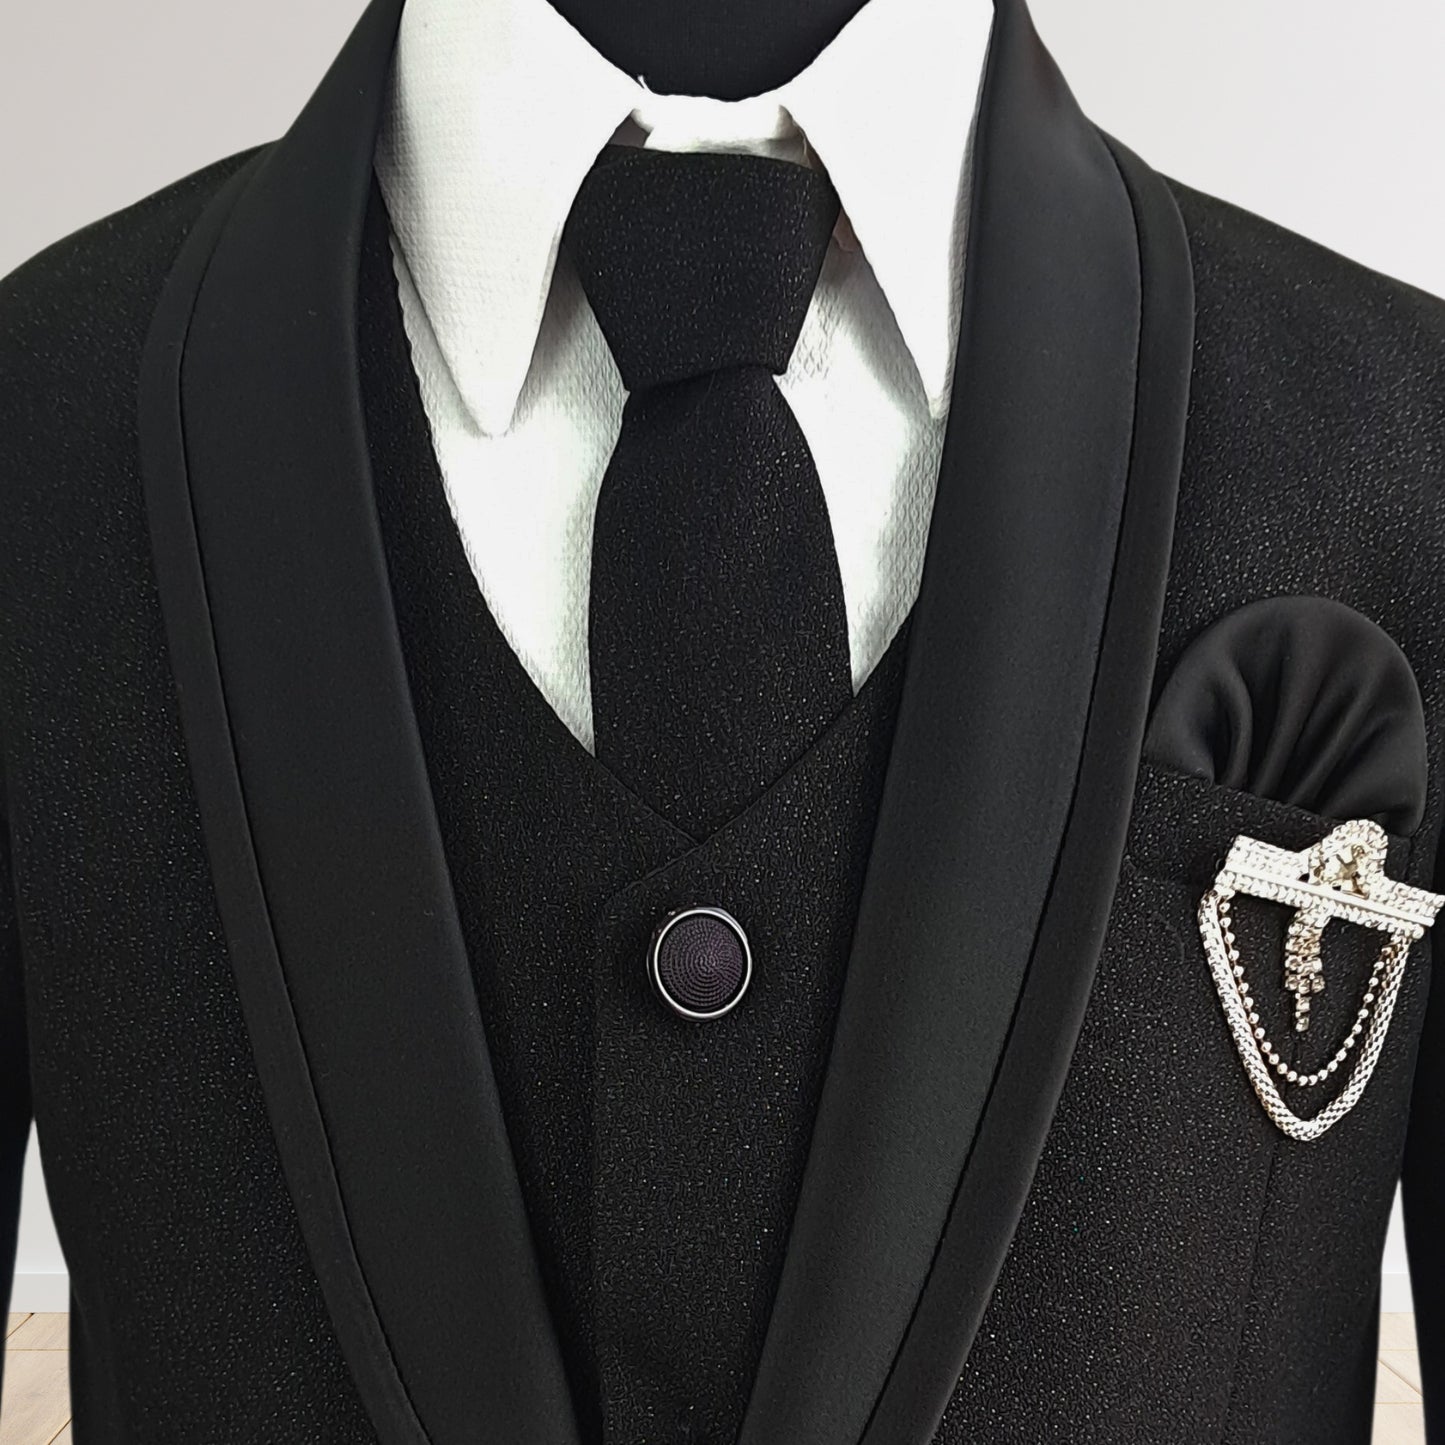 Black Color Shimmer 5 Piece Party Suit With Brooch and Satin Lapels